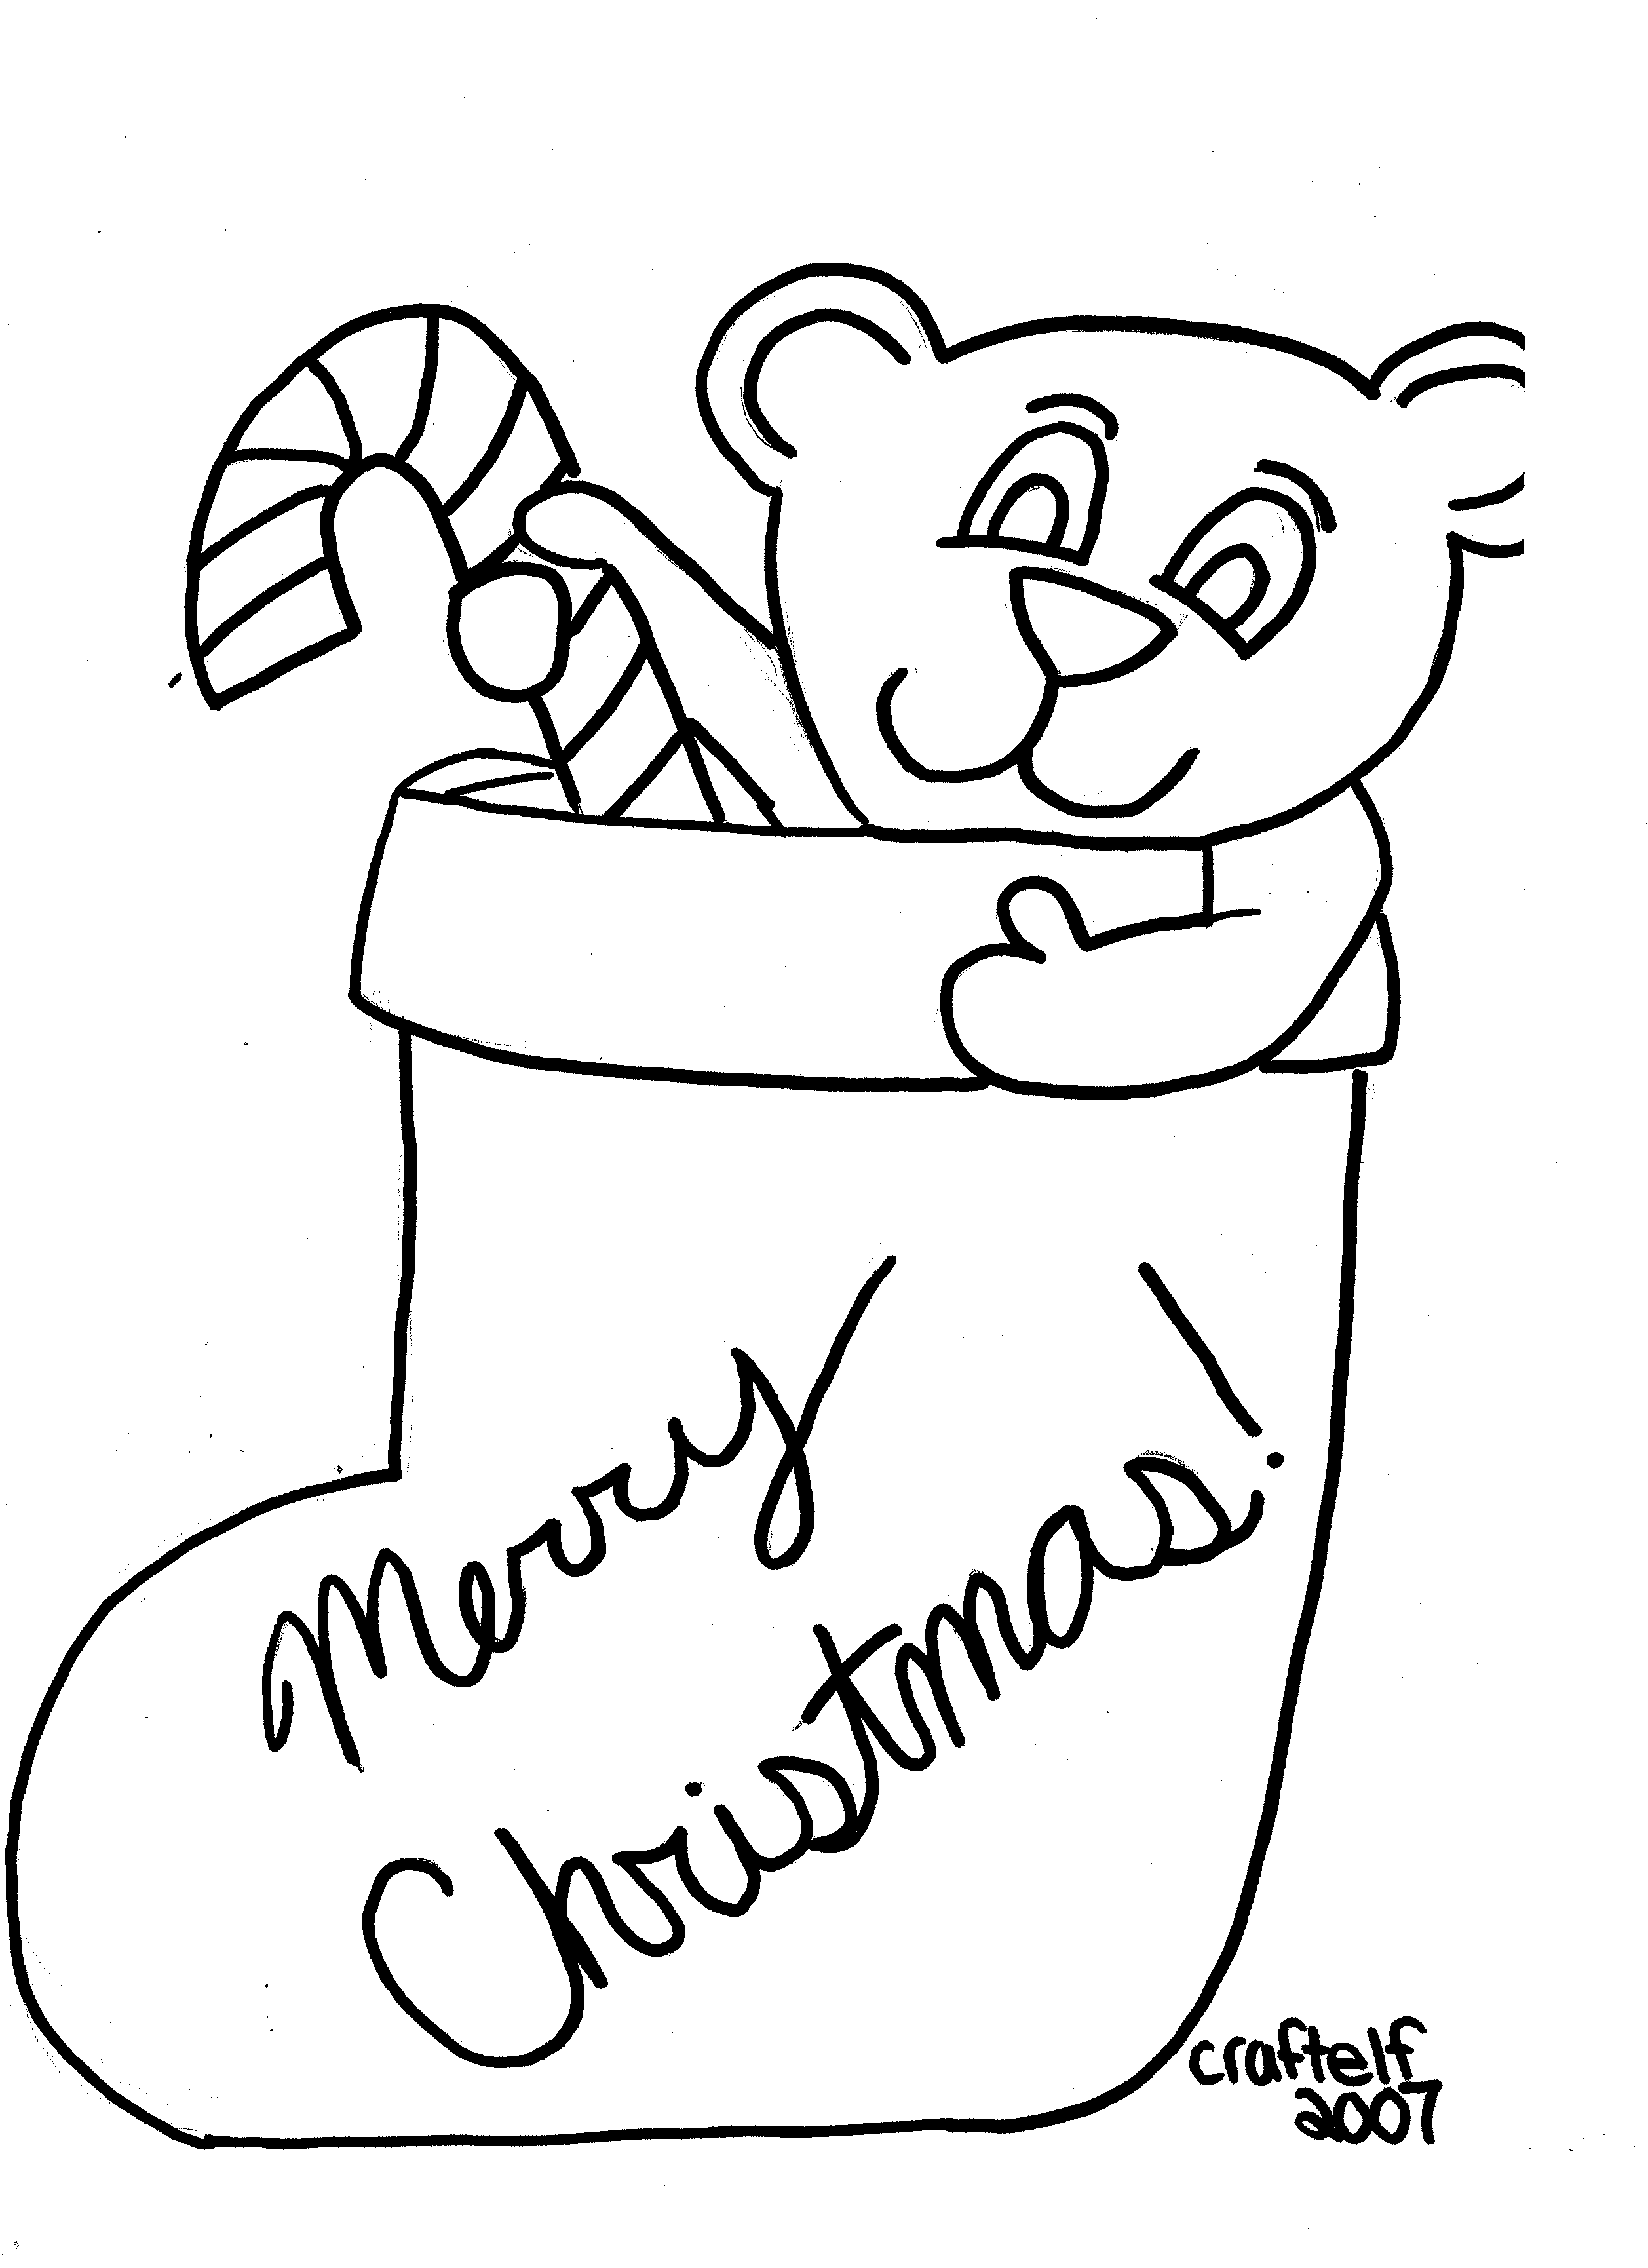 Free printable coloring page - Teddy bear in Christmas ...